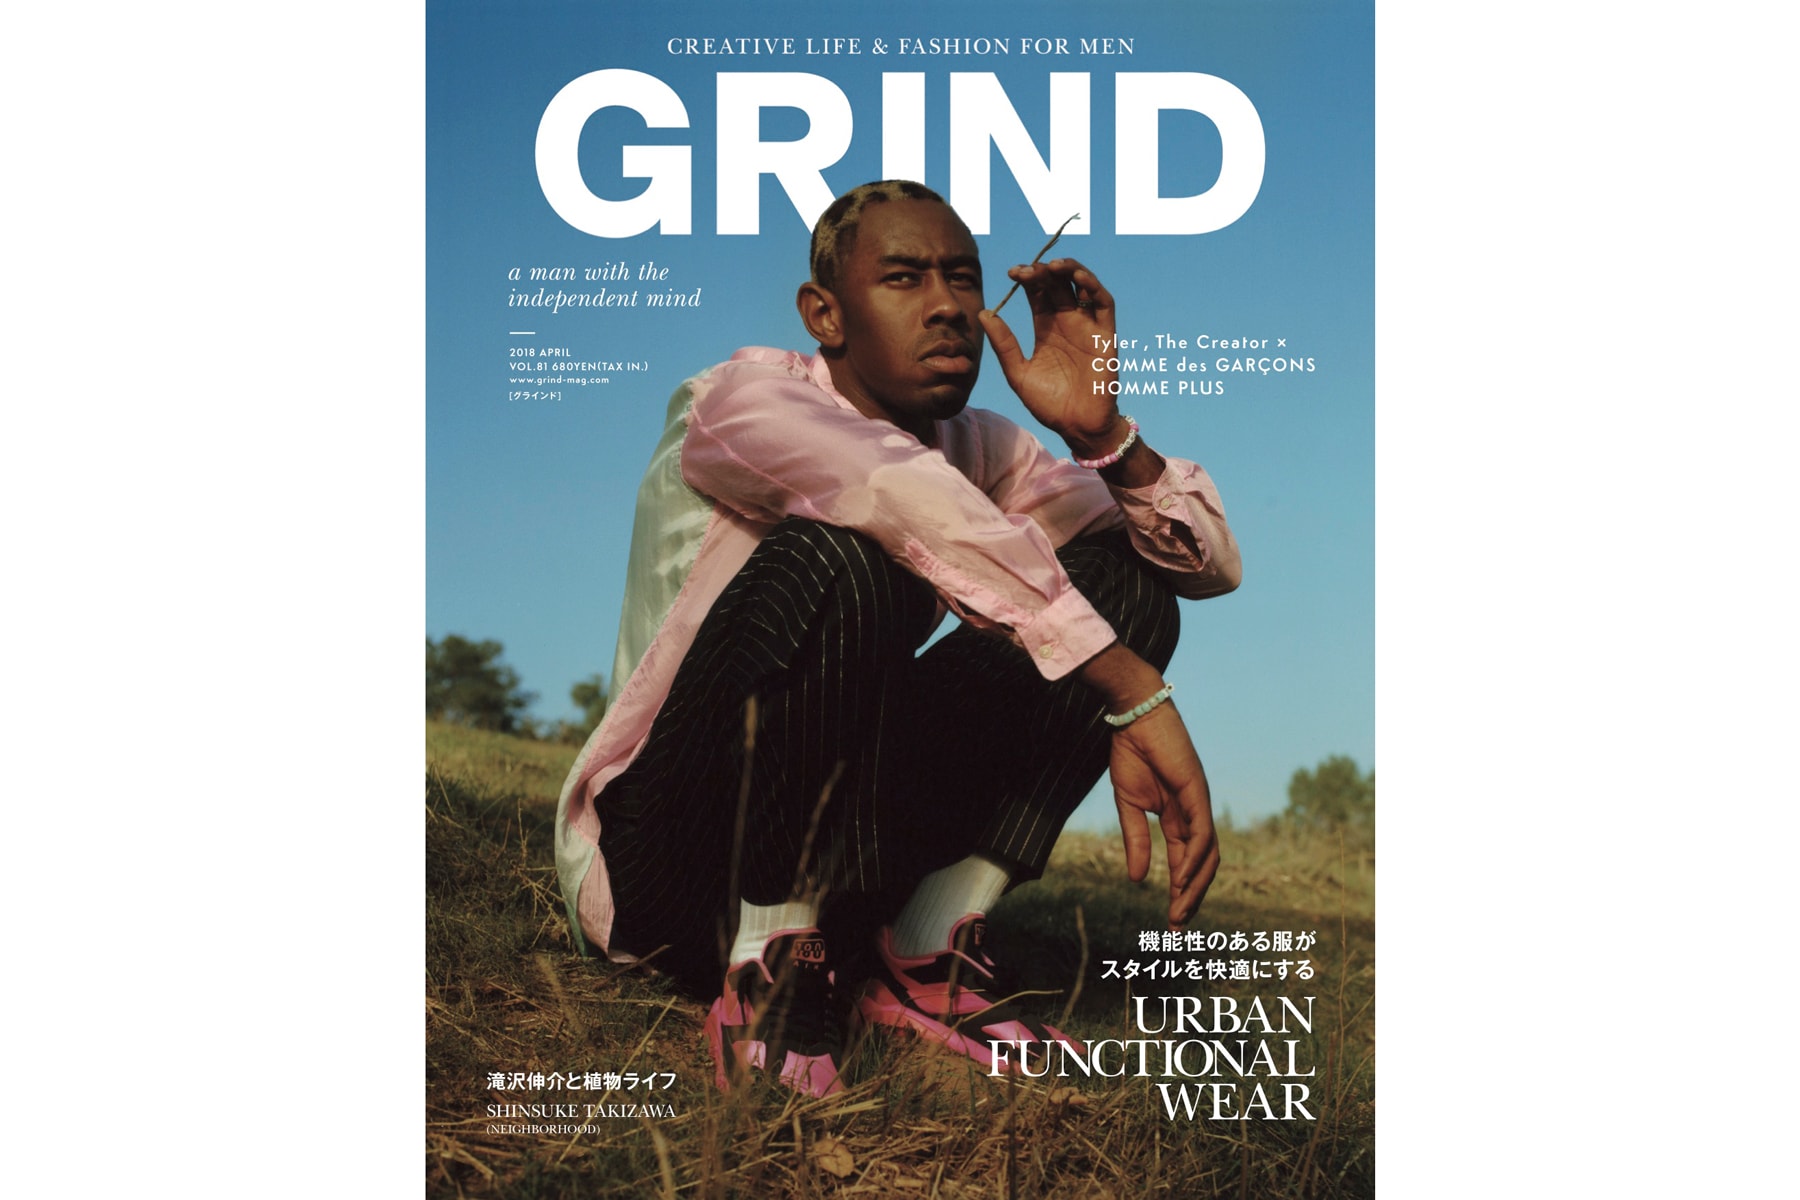 Tyler the Creator Grind magazine japan cover comme des garcons homme plus nike 180 air max april 2018 issue